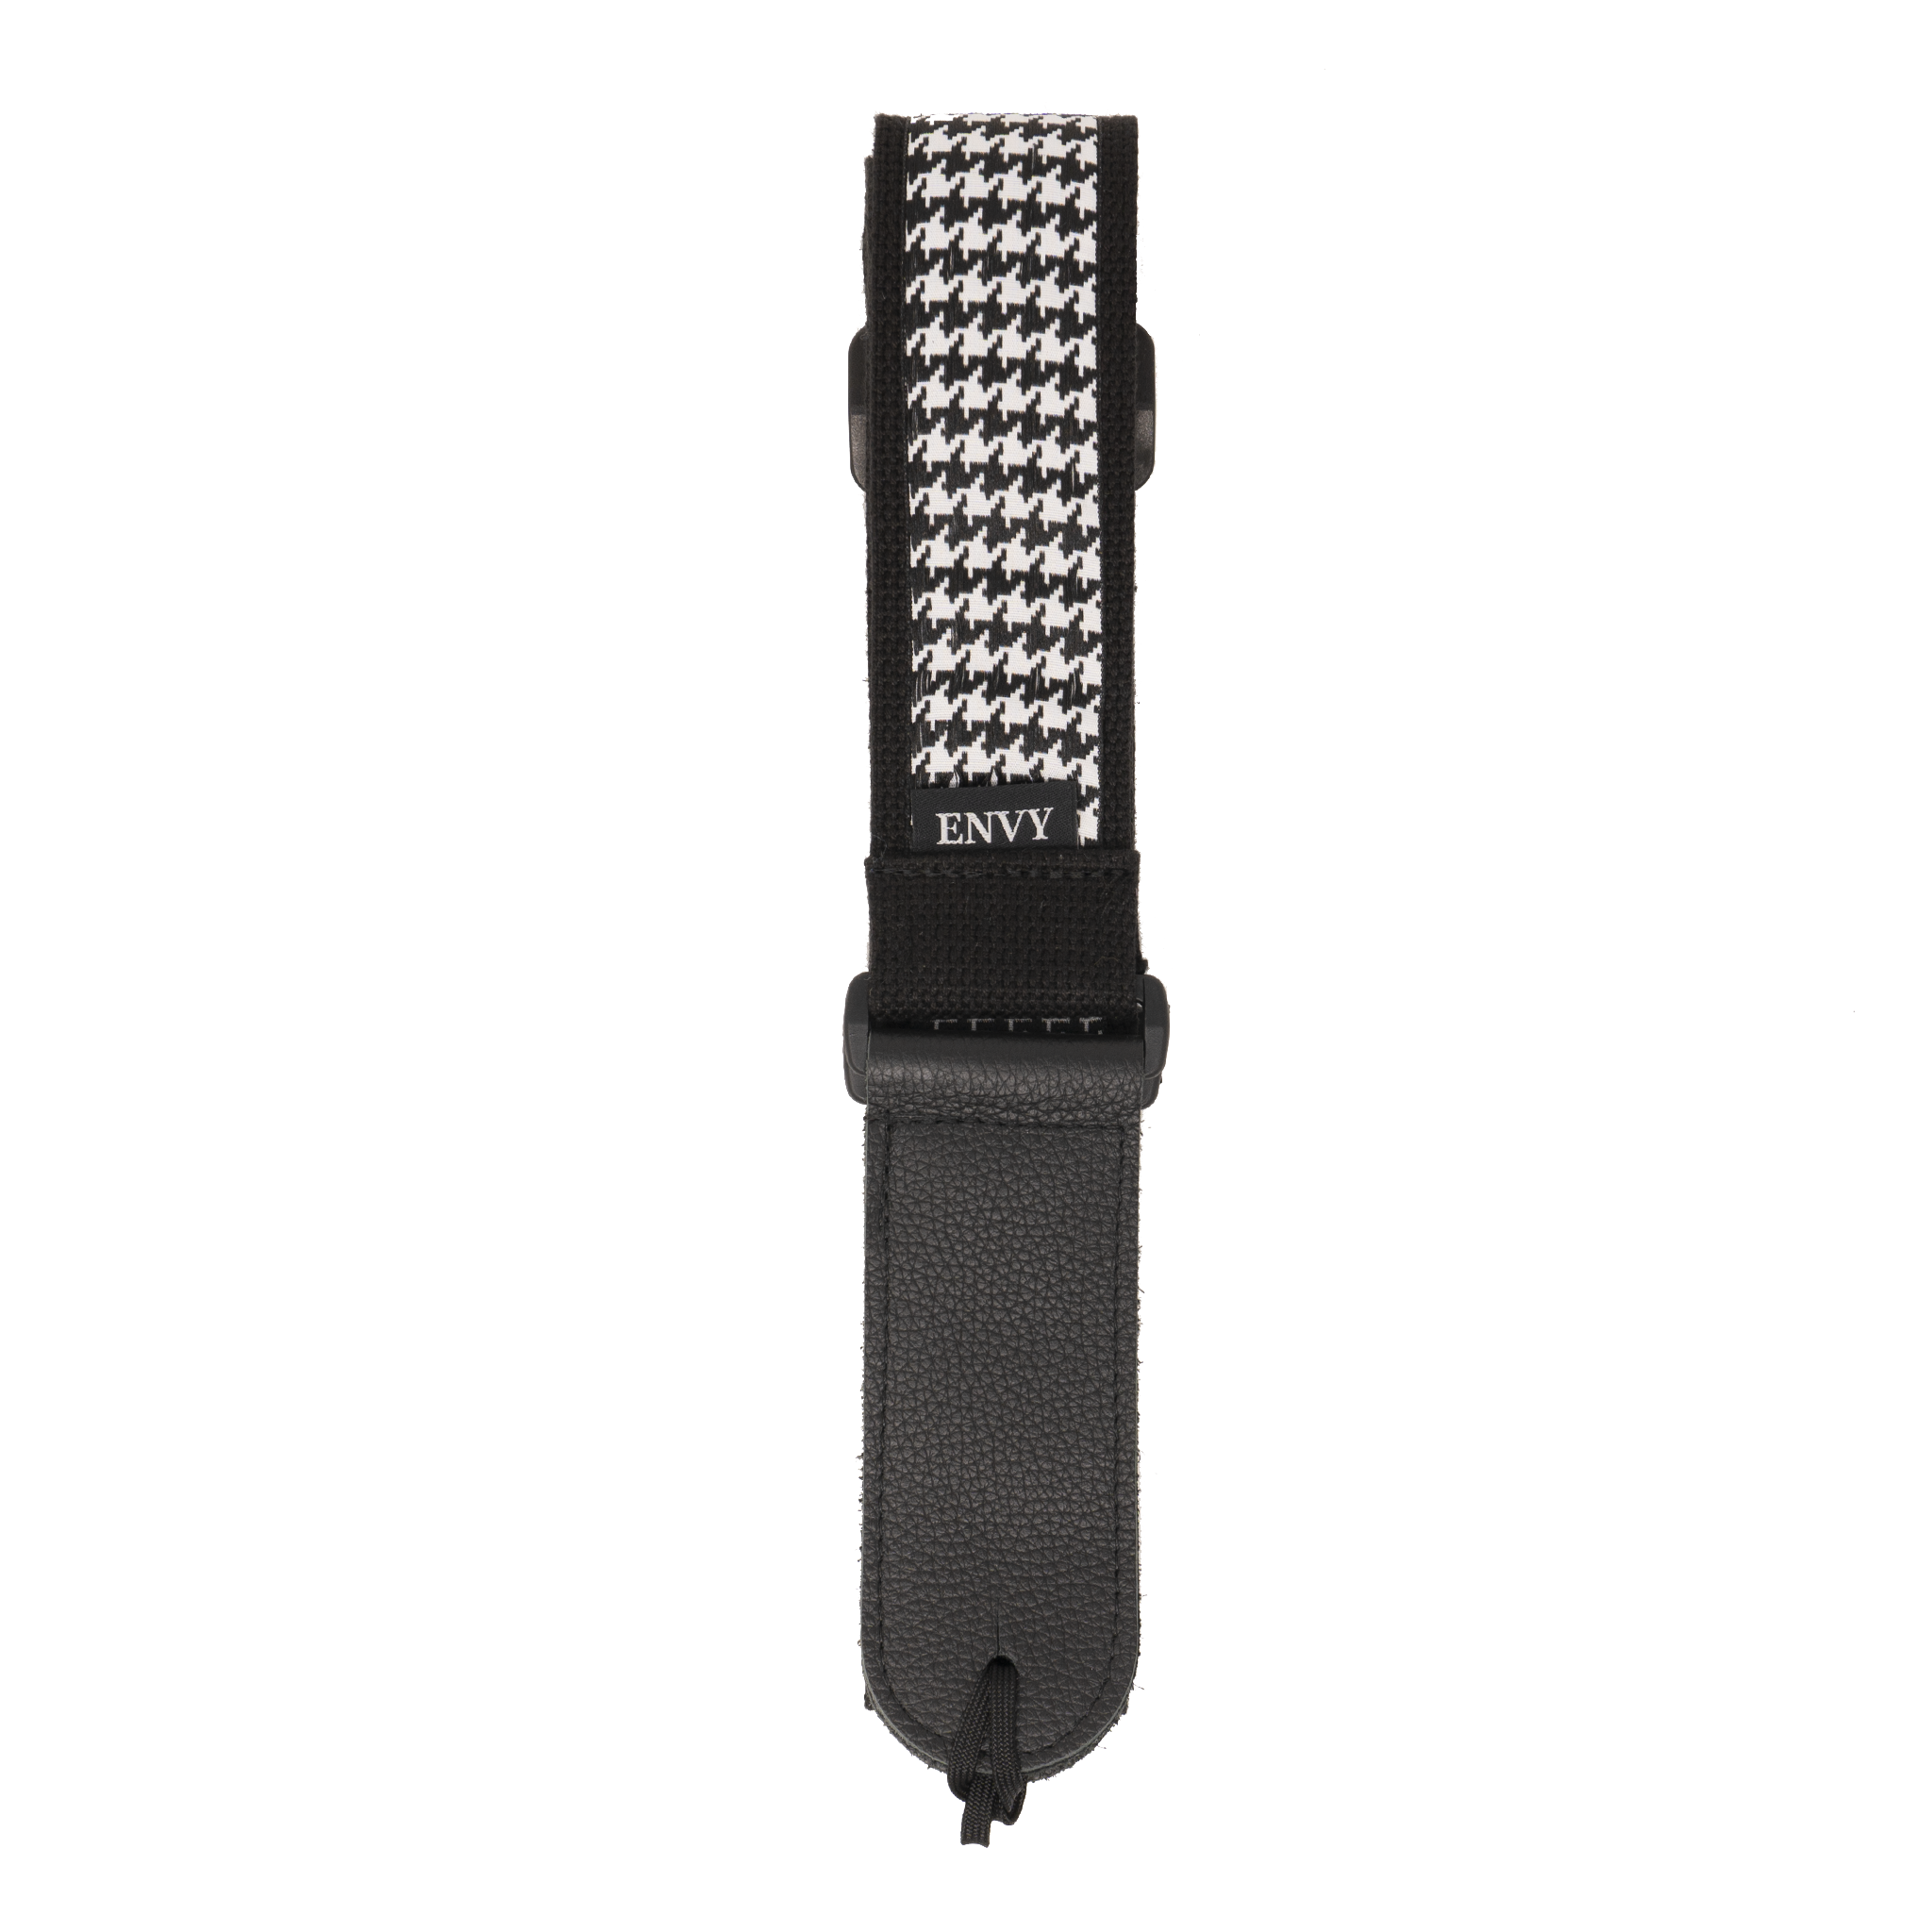 My Fave Guitar Strap in Black and White Houndstooth